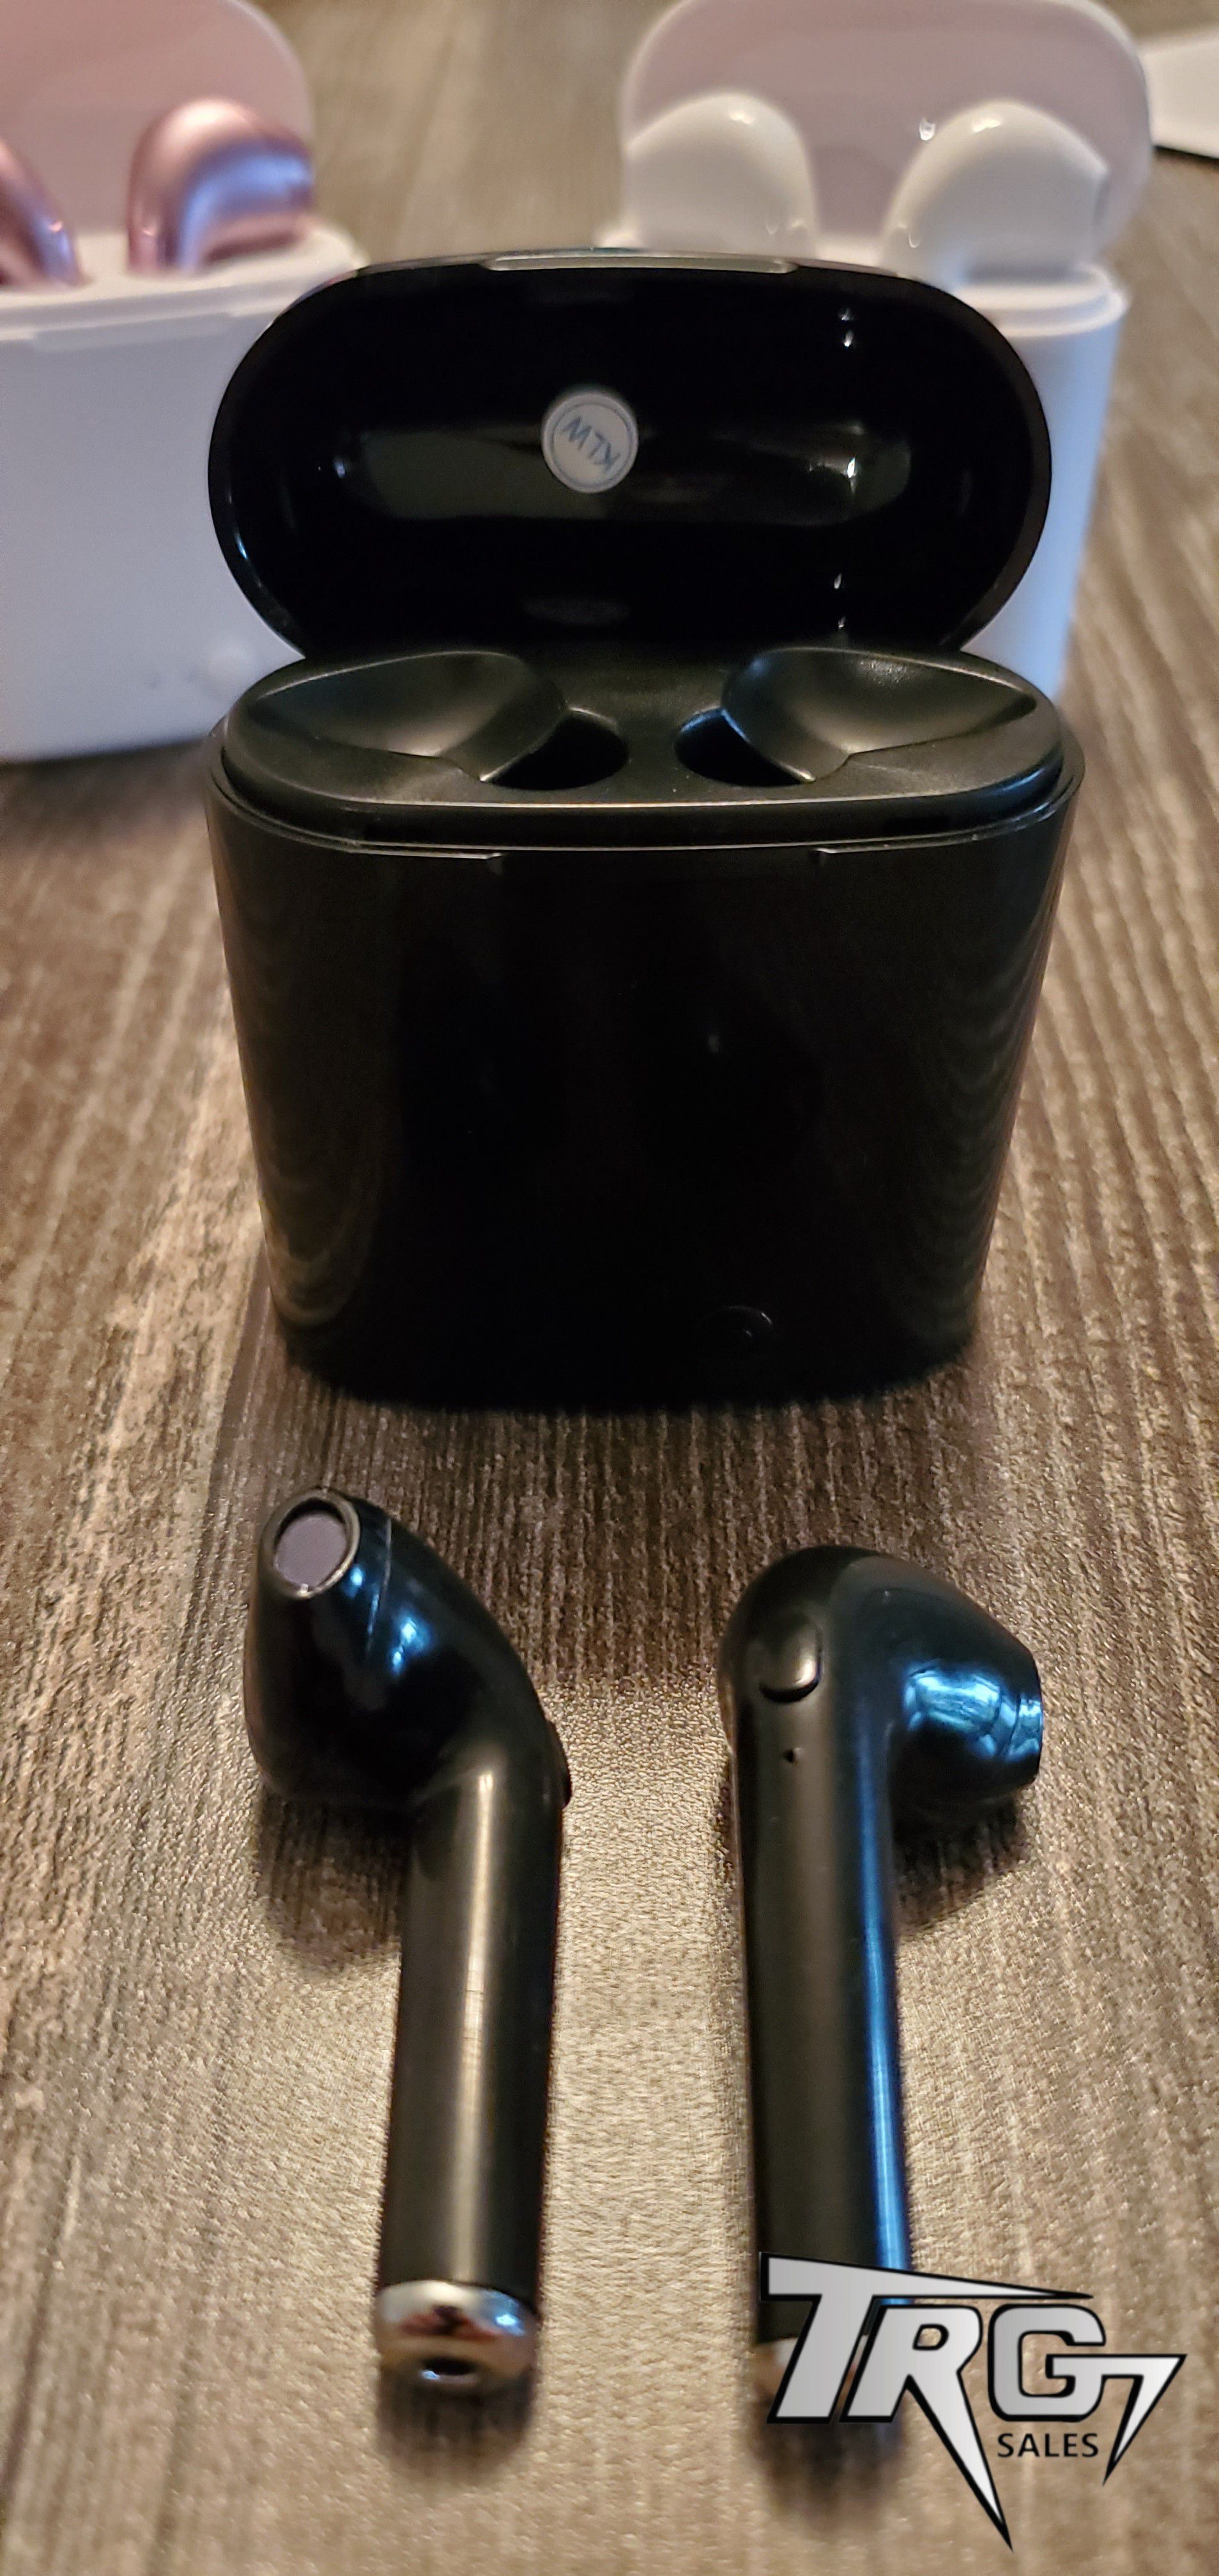 BRAND NEW EARPODS FOR ANDROID AND IPHONE 🎧 WIRELESS BLUETOOTH